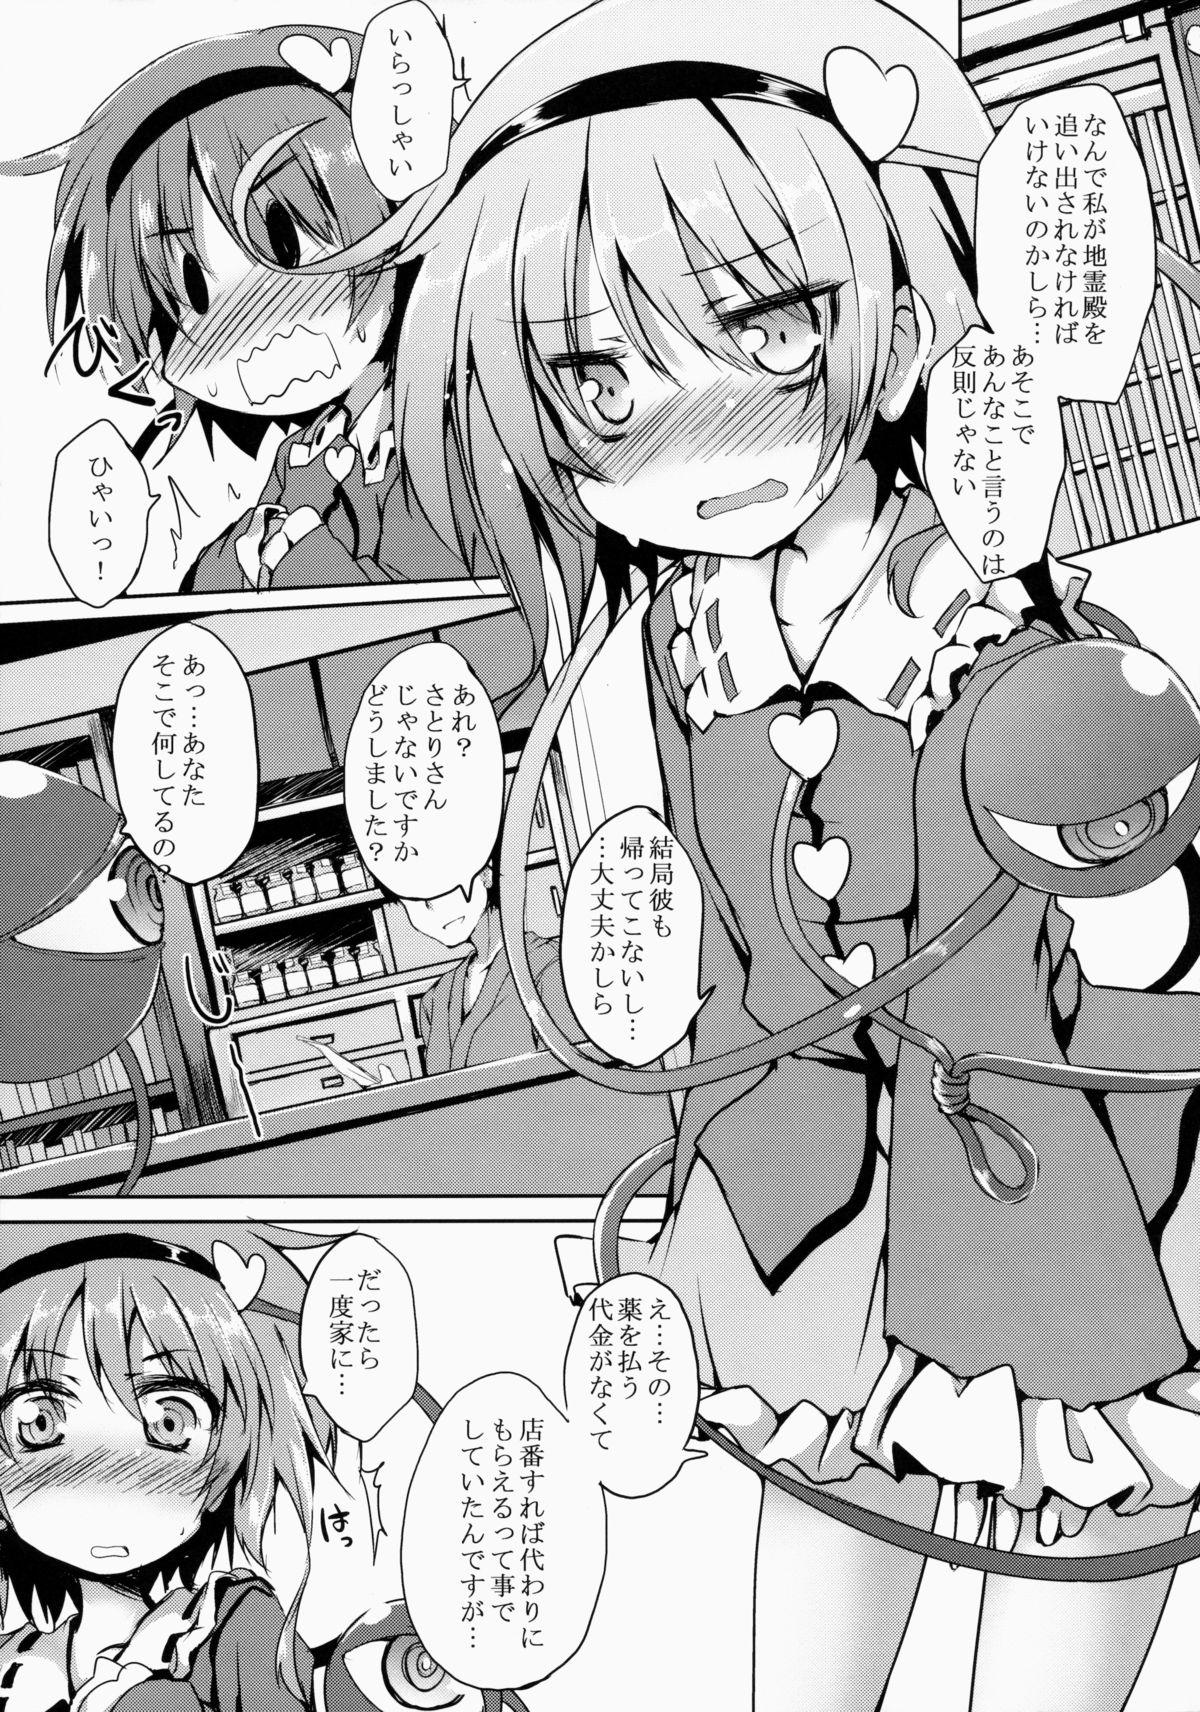 1080p Satori MAX - Touhou project Bedroom - Page 6